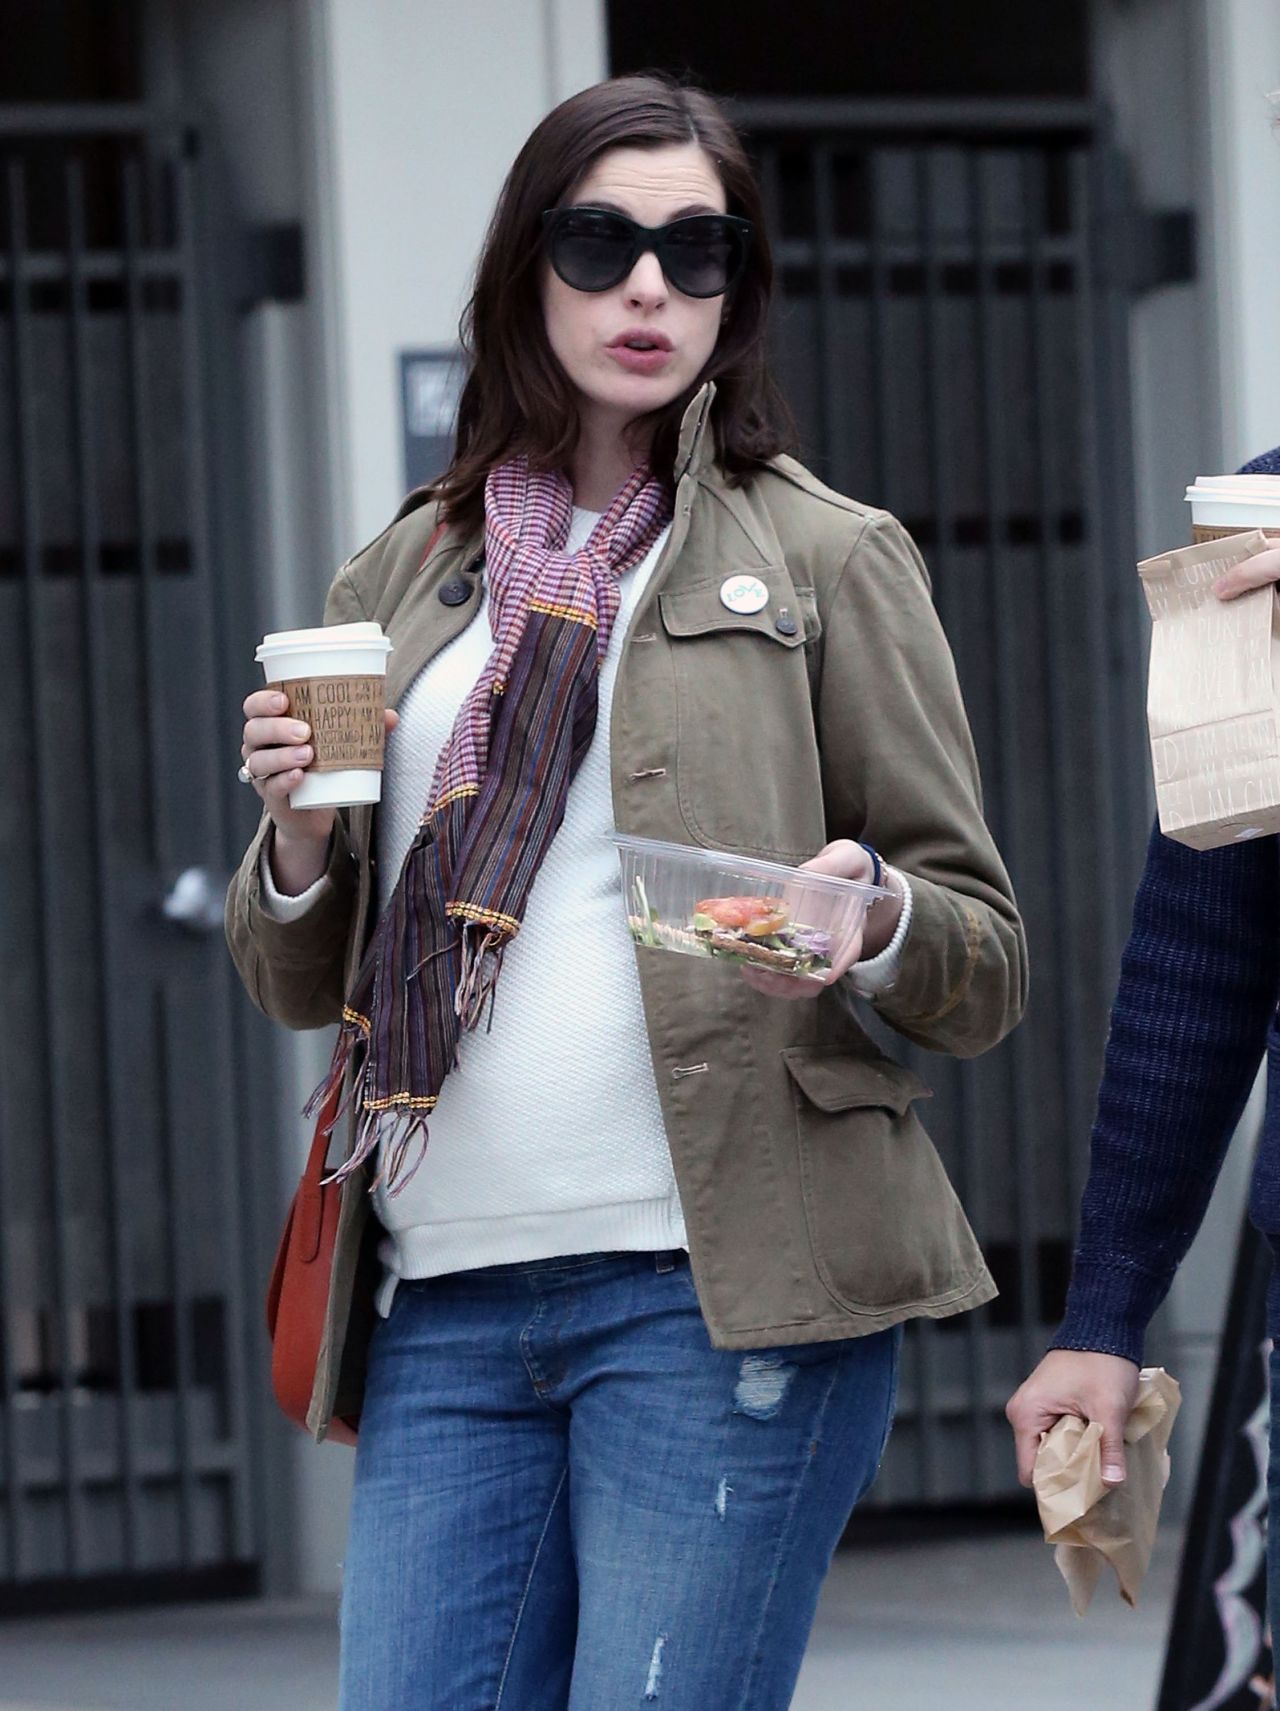 Anne Hathaway Street Style - at a Park in Los Angeles, January 2016